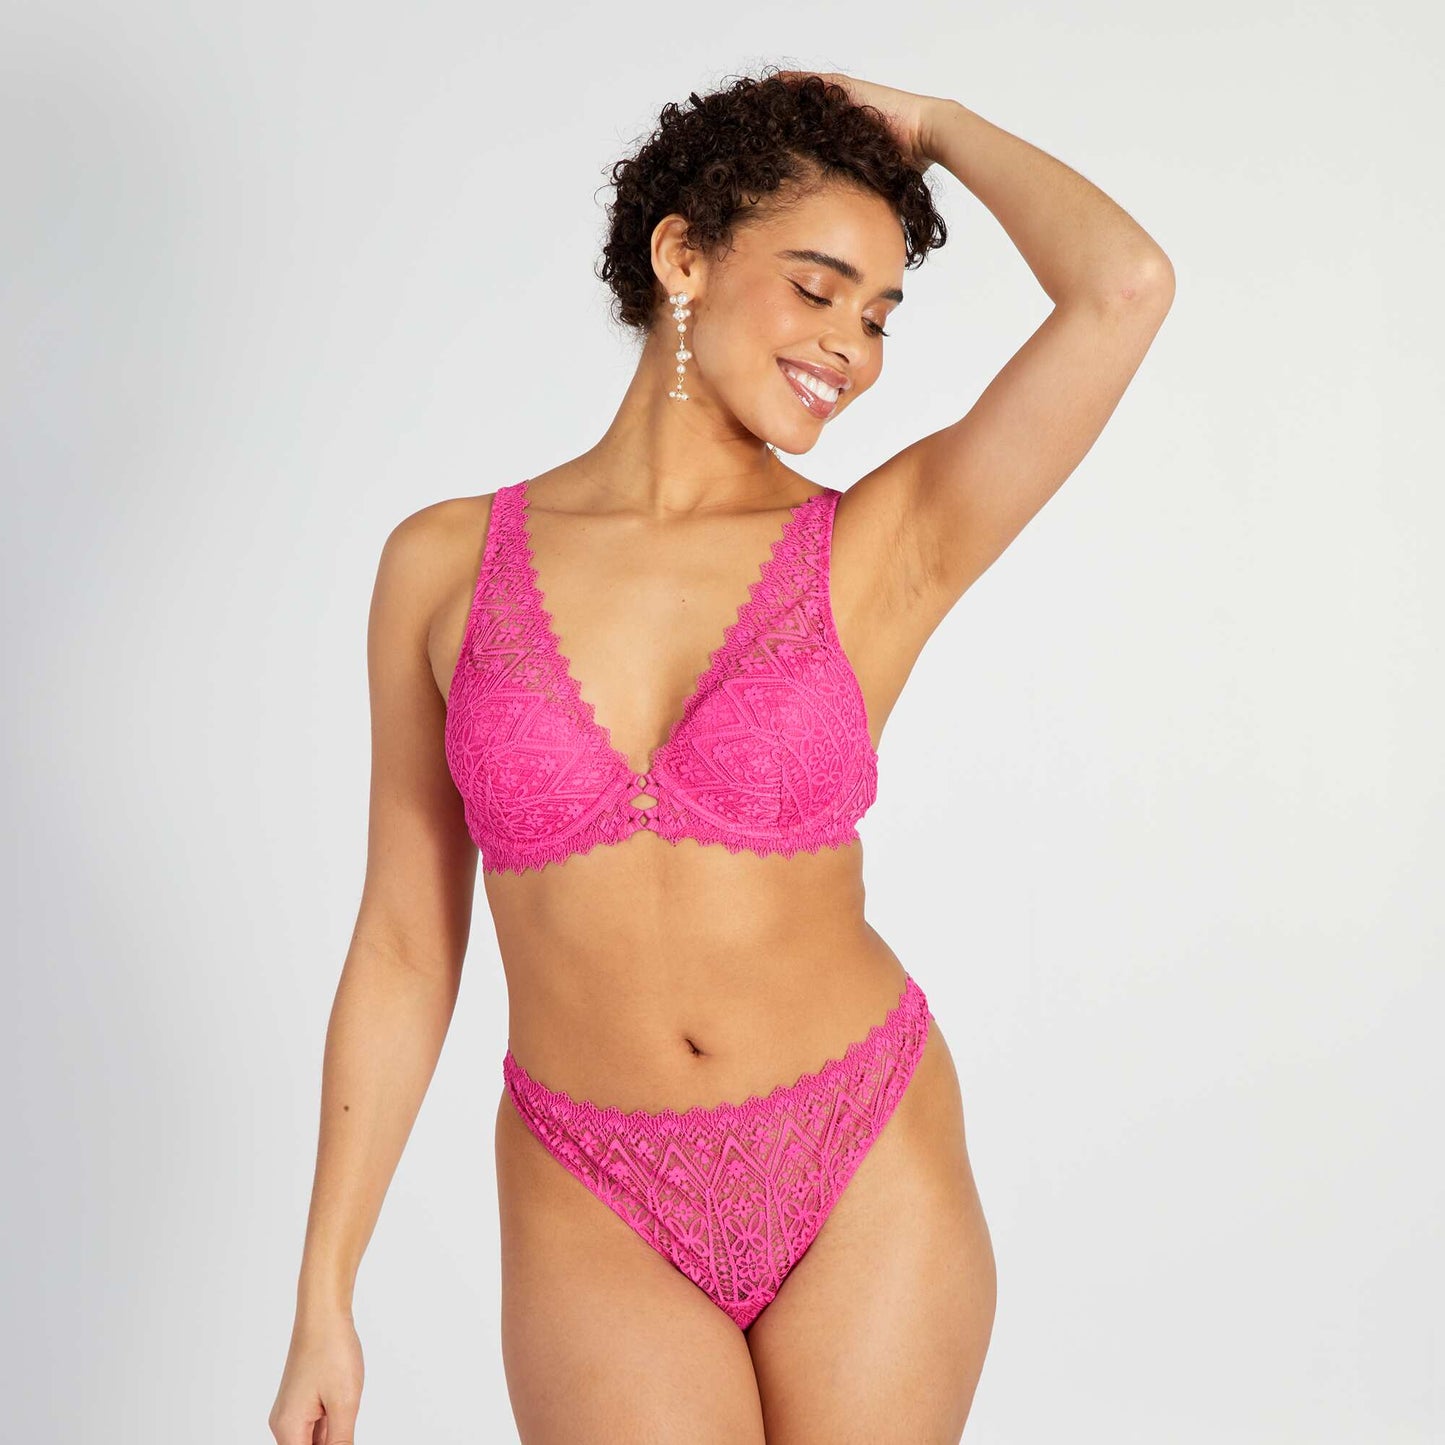 Floral lace bra PINK BERRY